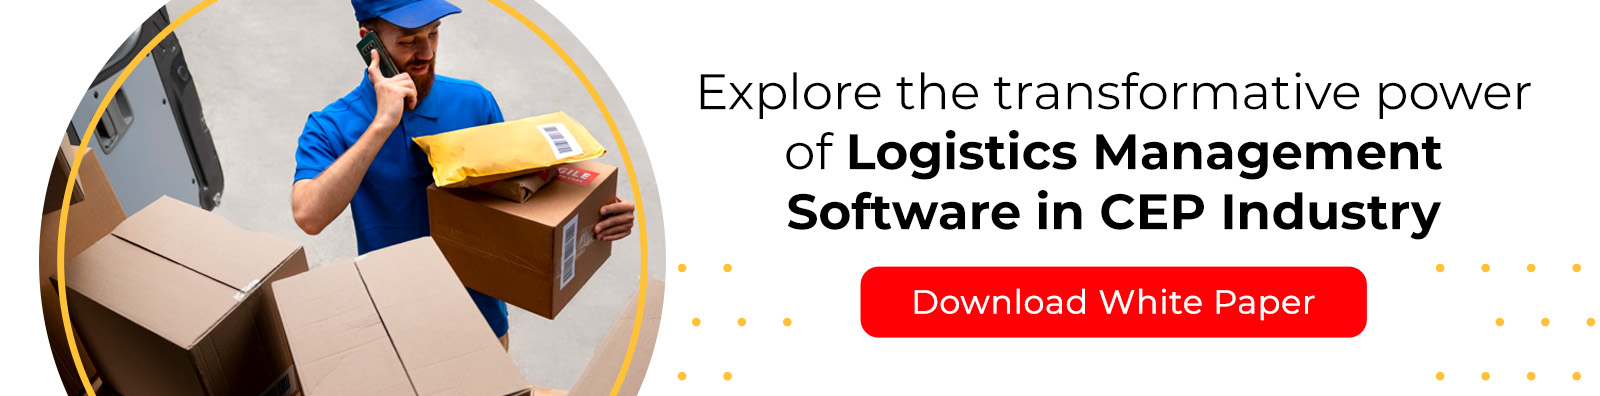 The transformative power of Logistics management software in the CEP Industry